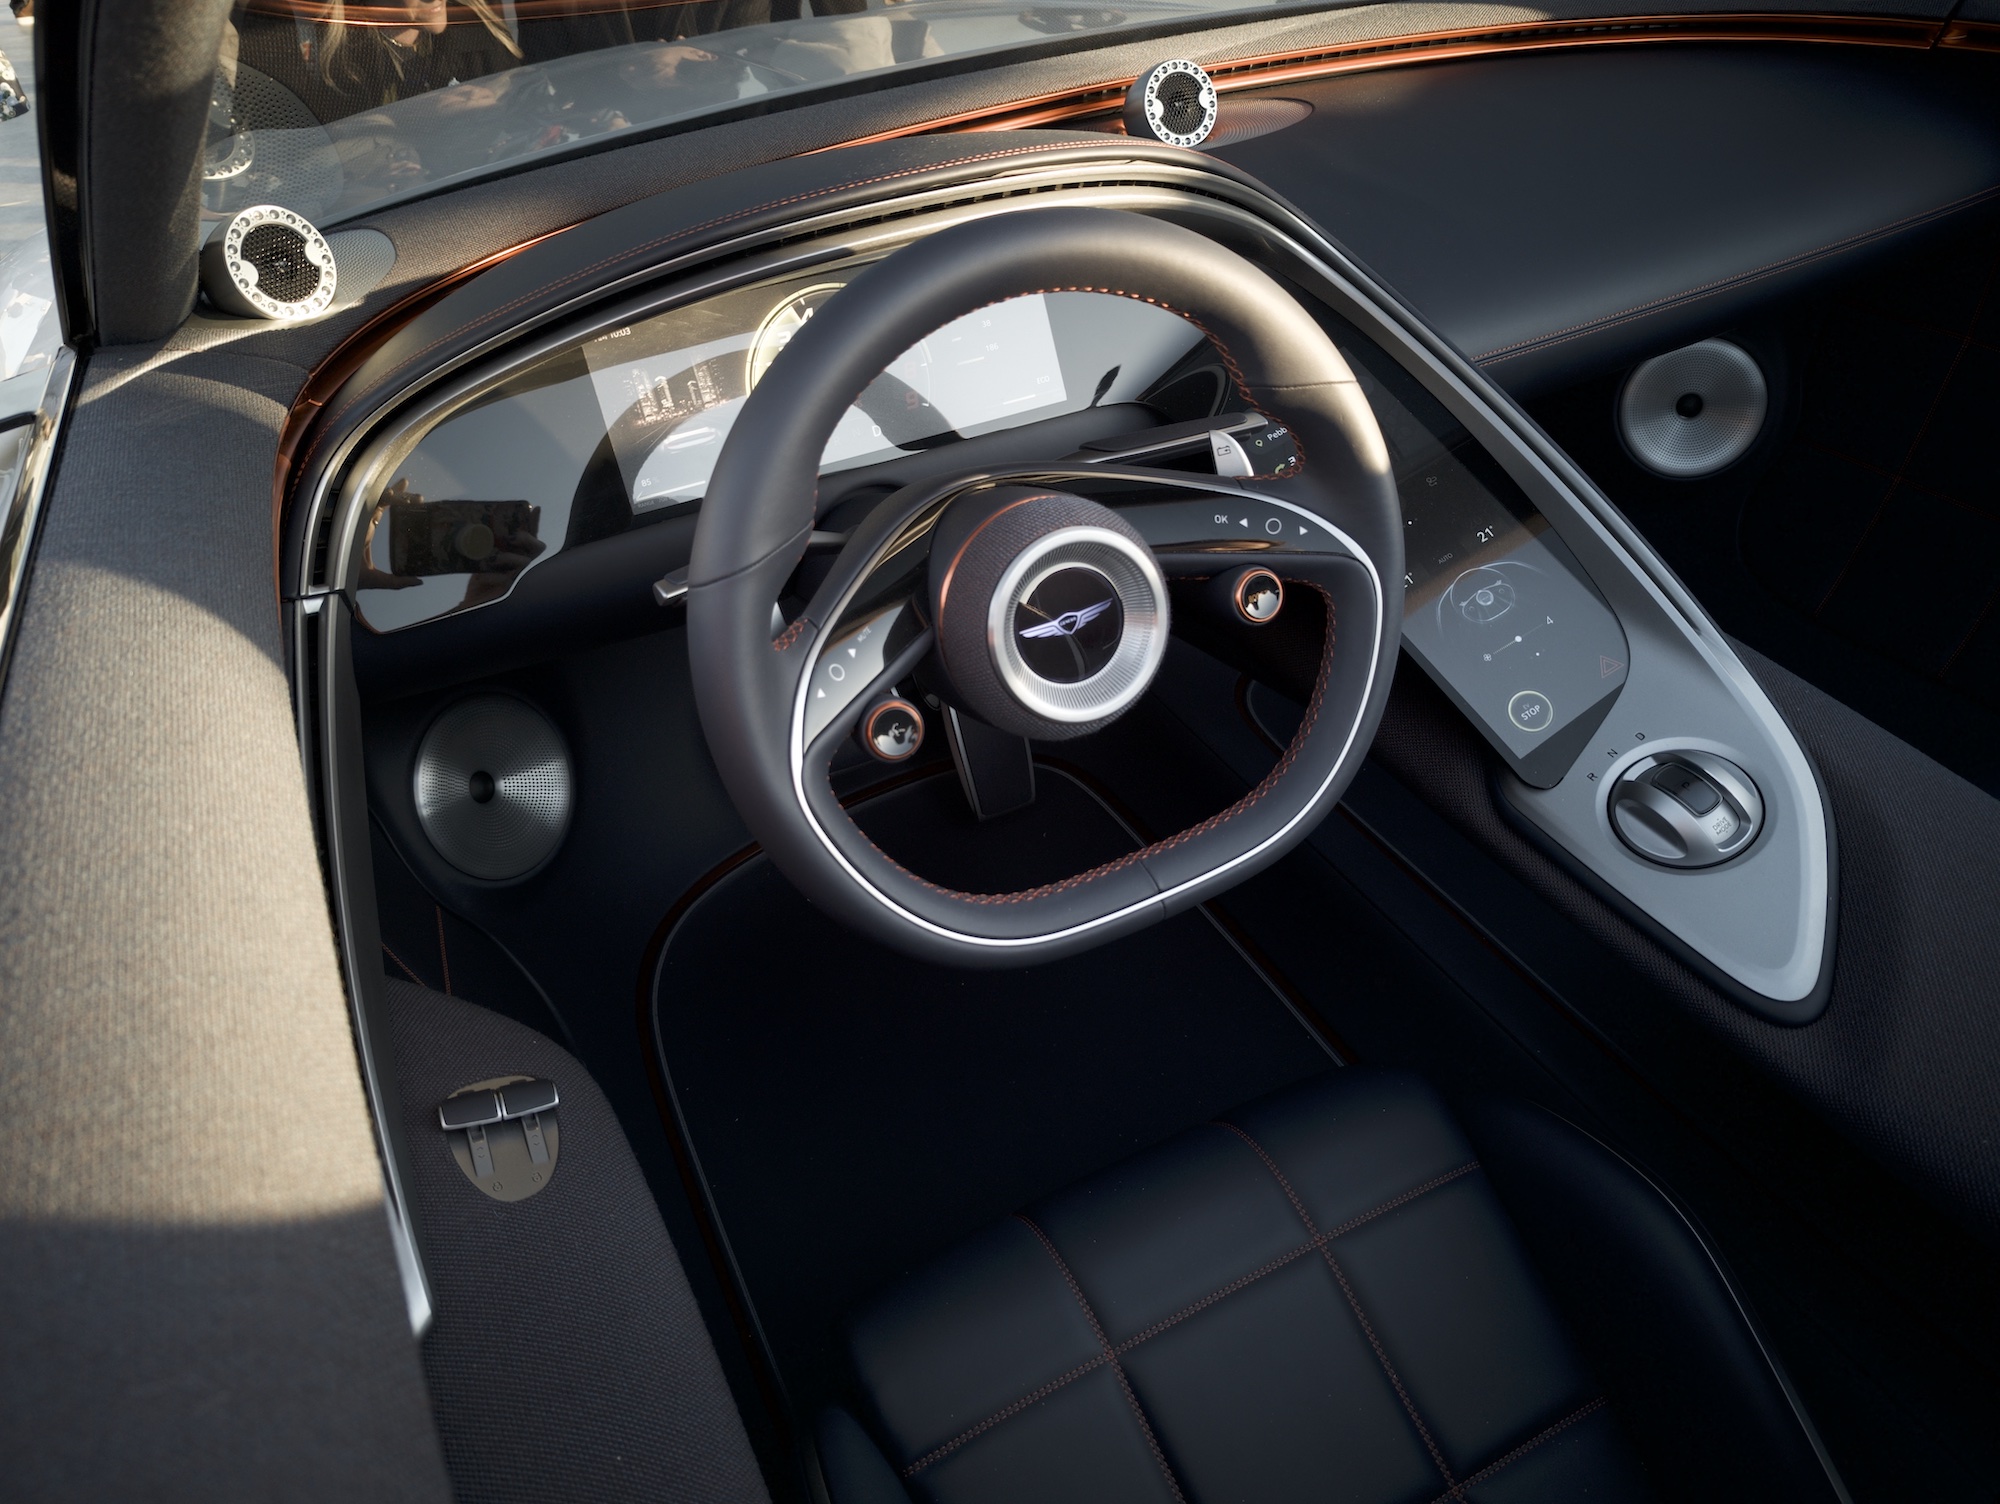 Genesis X convertible from within